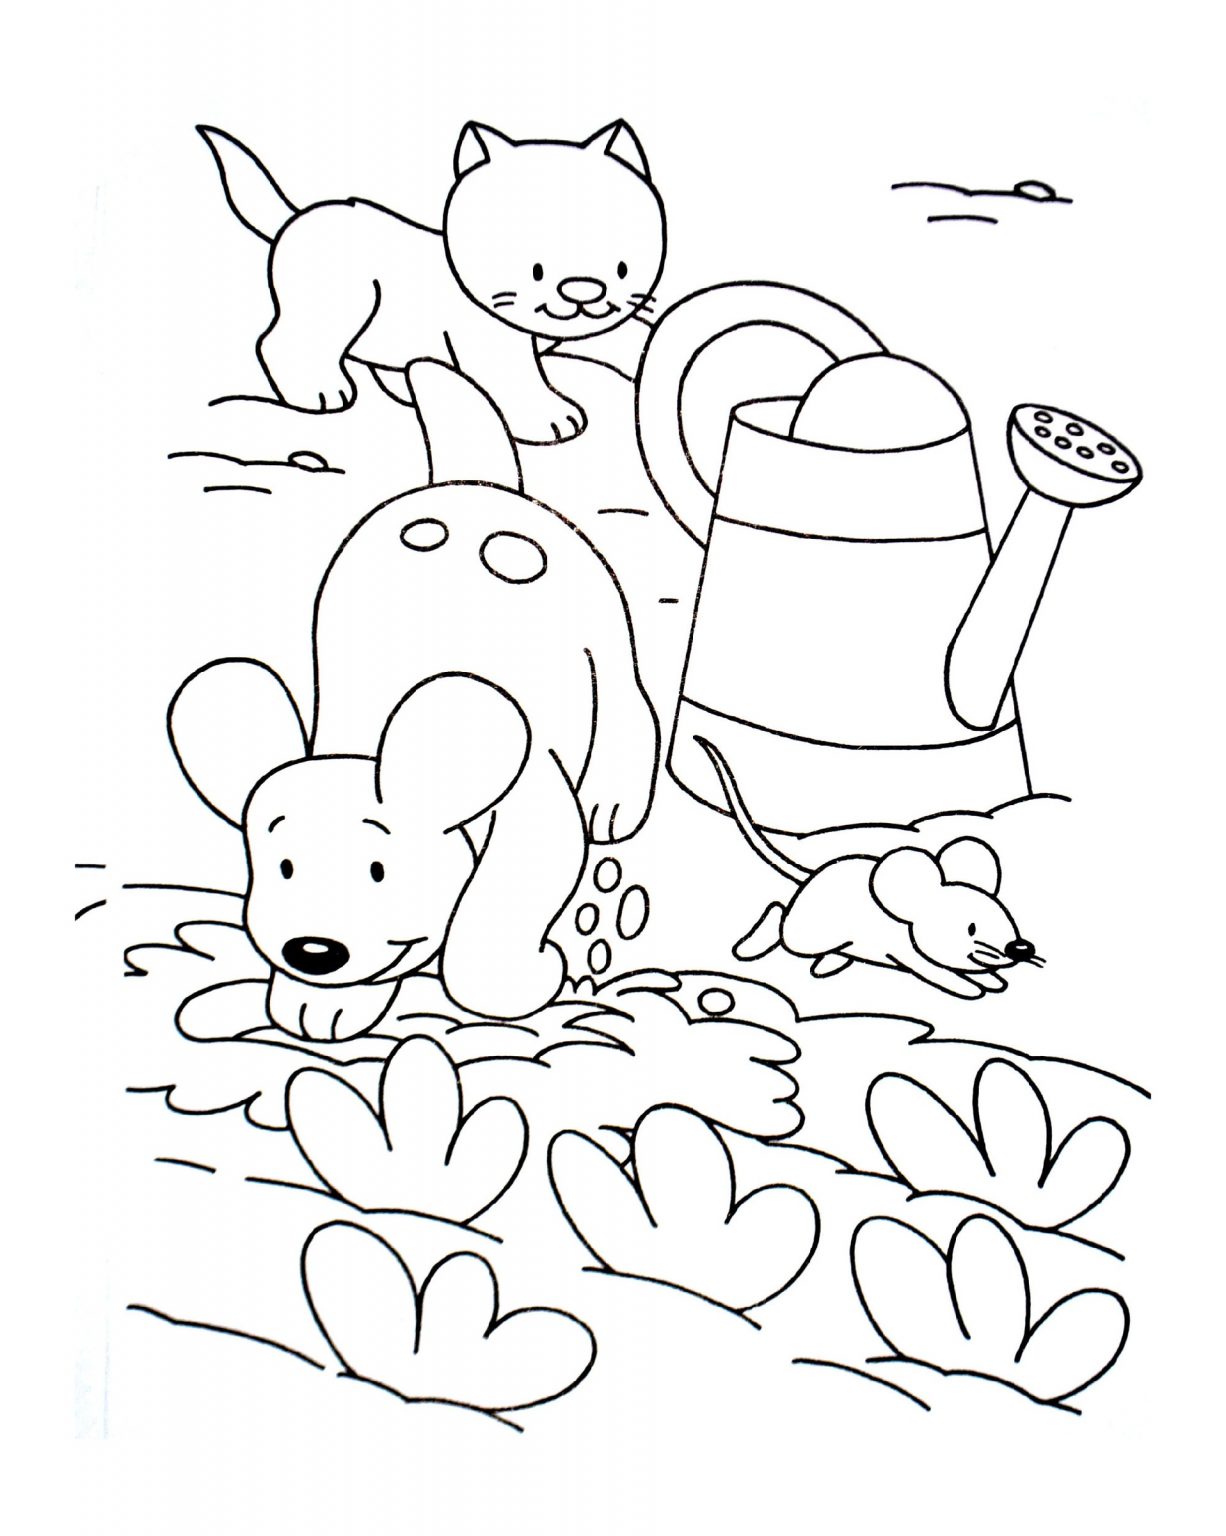 Cat and Dog Coloring Pages 101 Coloring